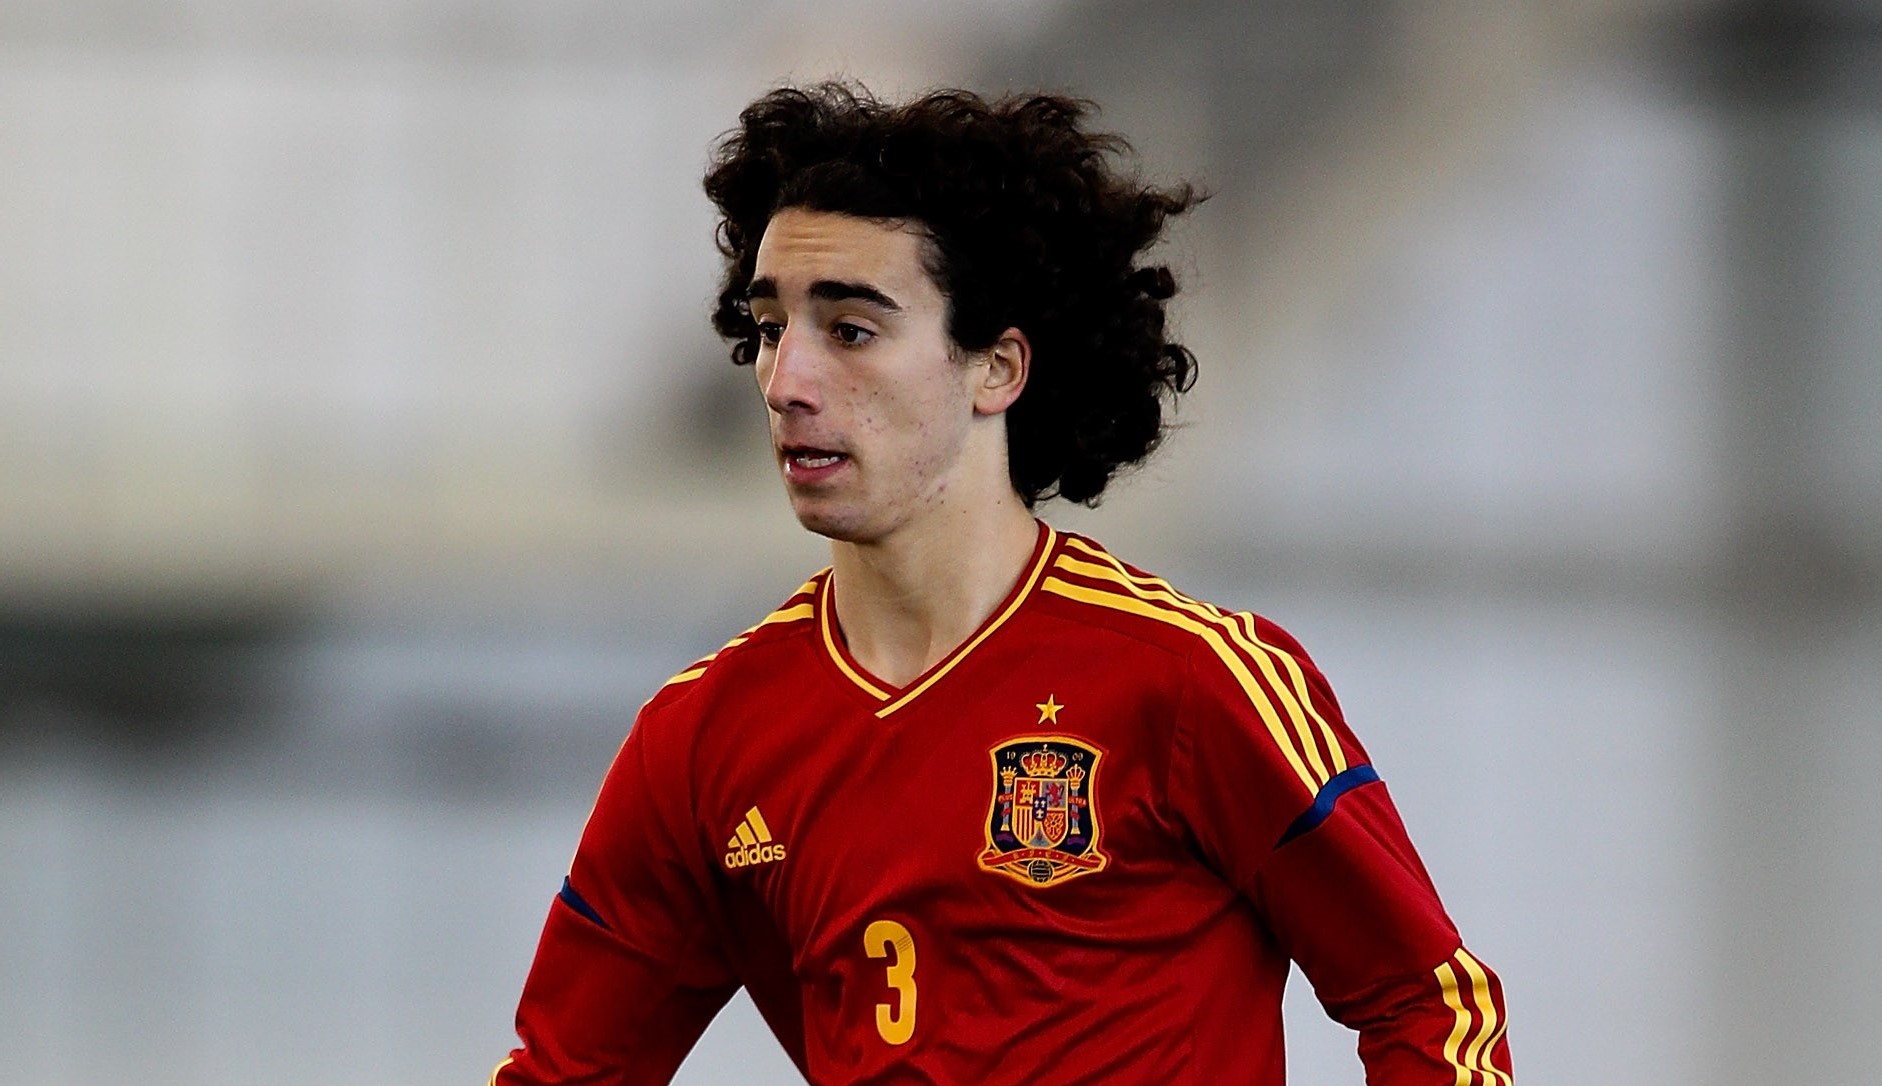 BURTON-UPON-TRENT, ENGLAND - FEBRUARY 11: Marc Cucurella of Spain in action during a U16 International match between Spain and Belgium at St Georges Park on February 11, 2014 in Burton-upon-Trent, England. (Photo by Ben Hoskins/Getty Images)